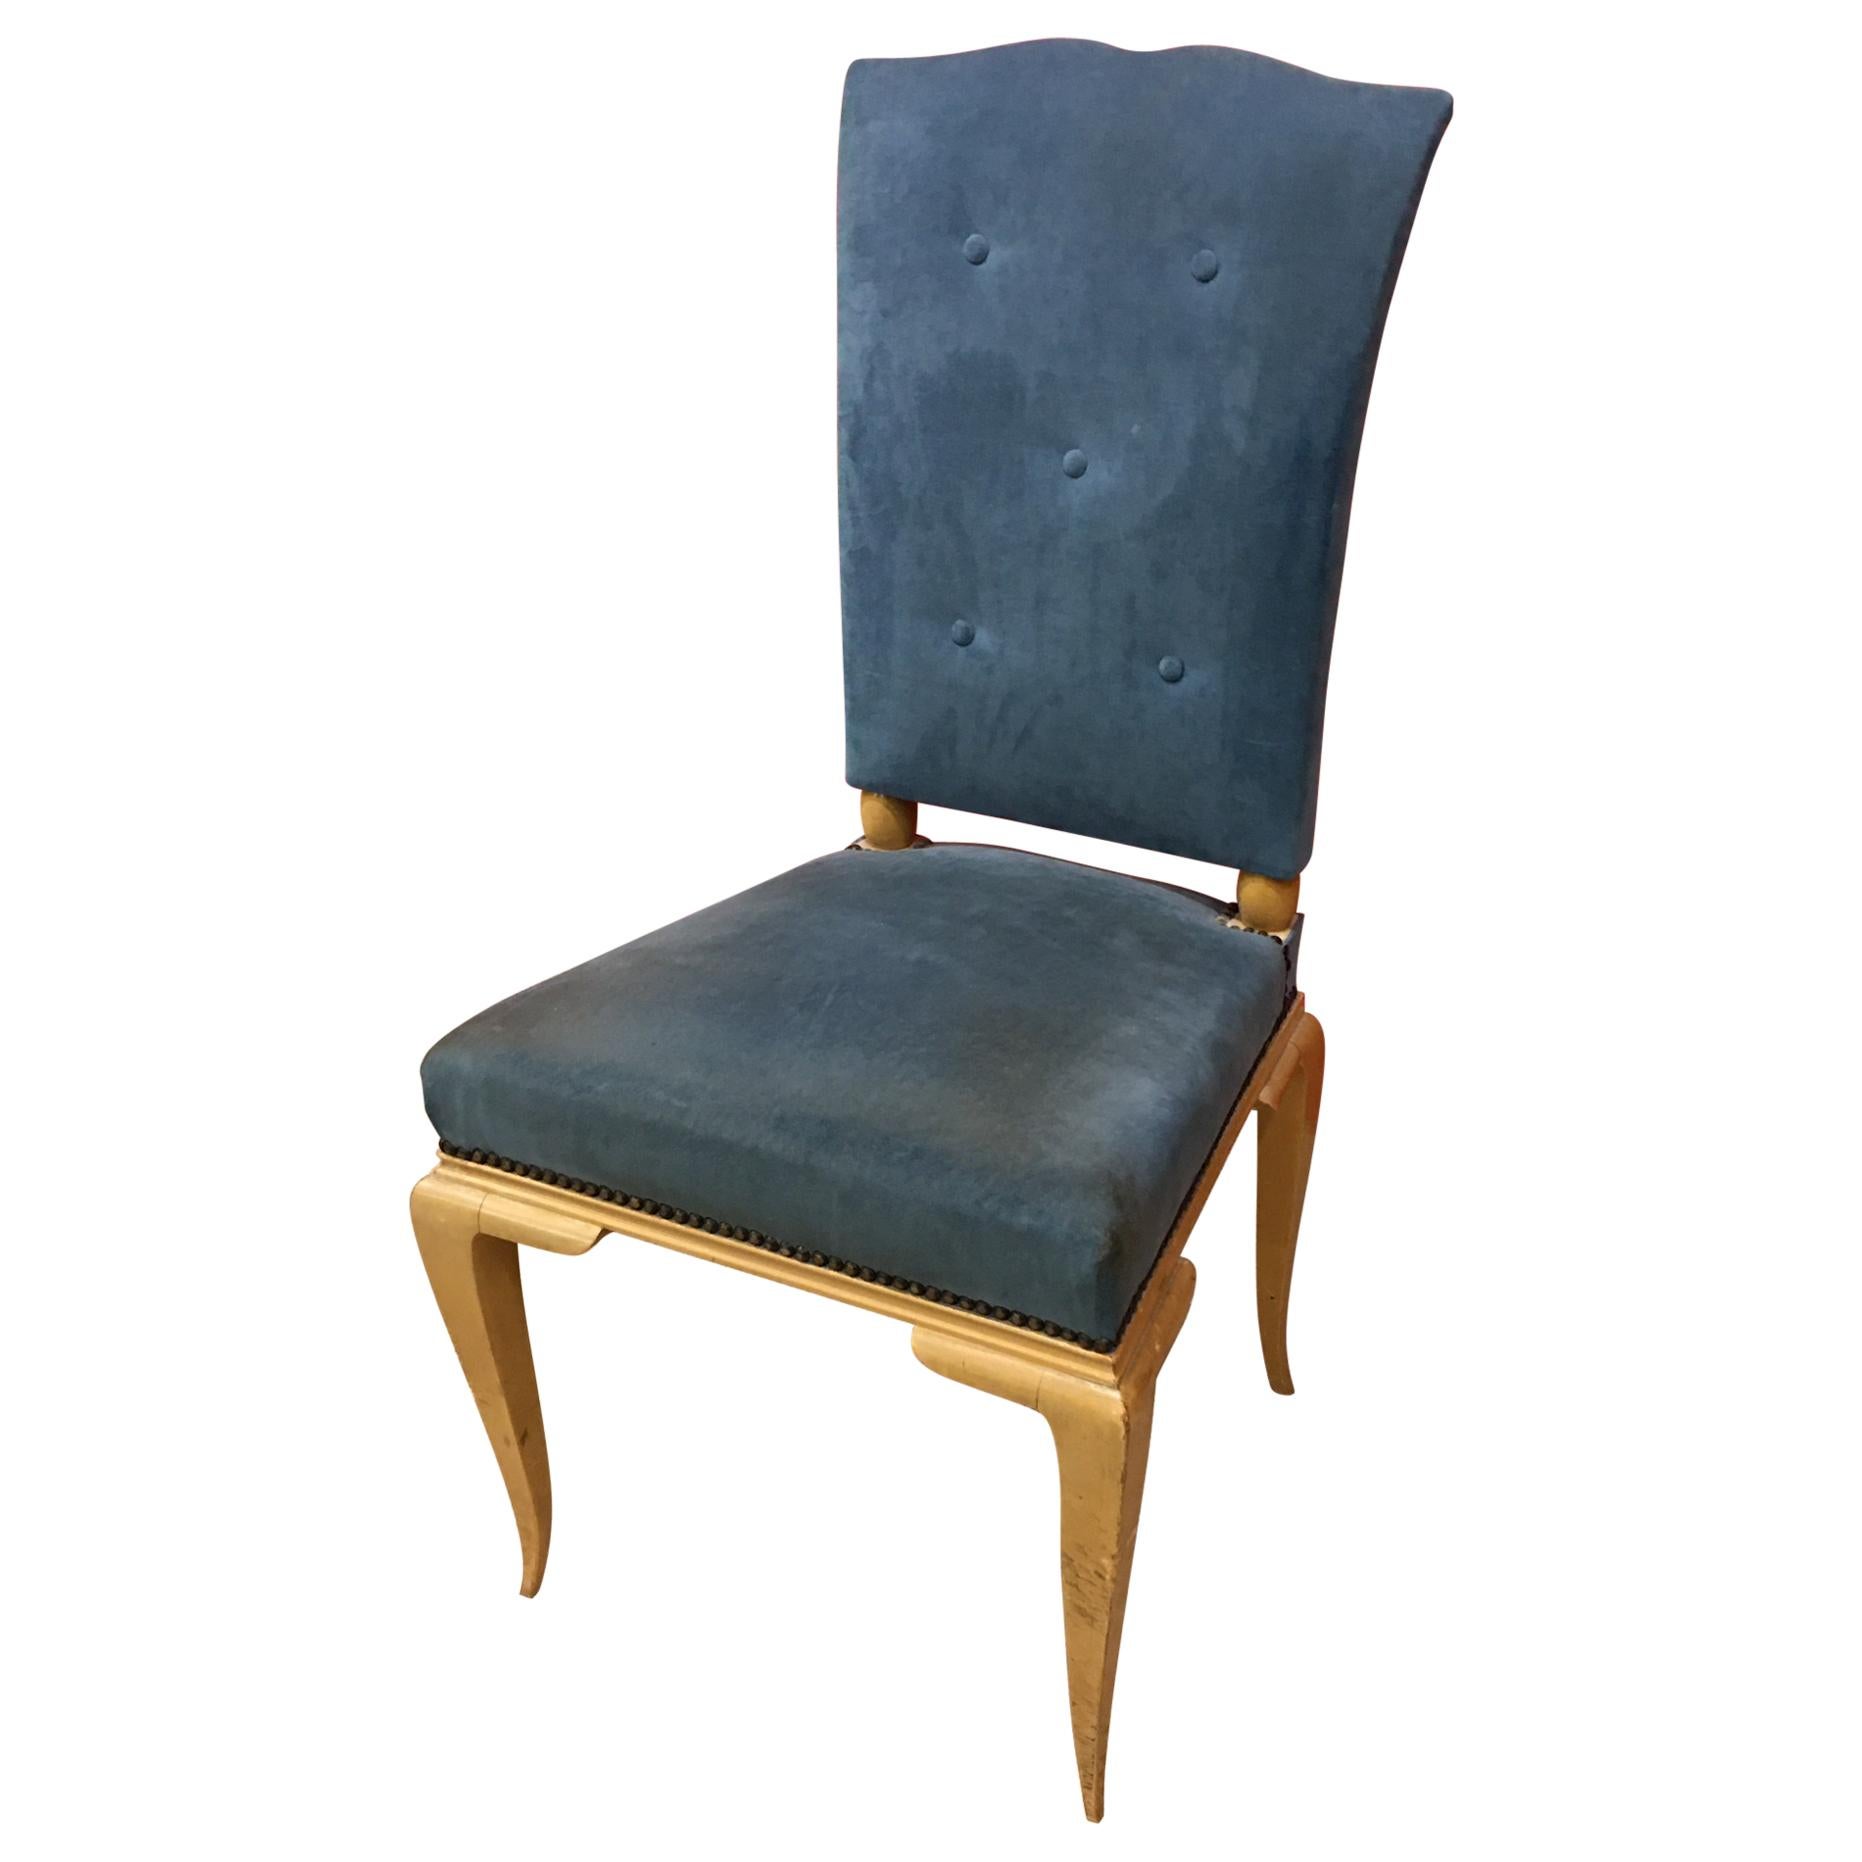 René Prou, Art Deco Chair in Lacquered Wood and Blue Velvet, circa 1940-1950